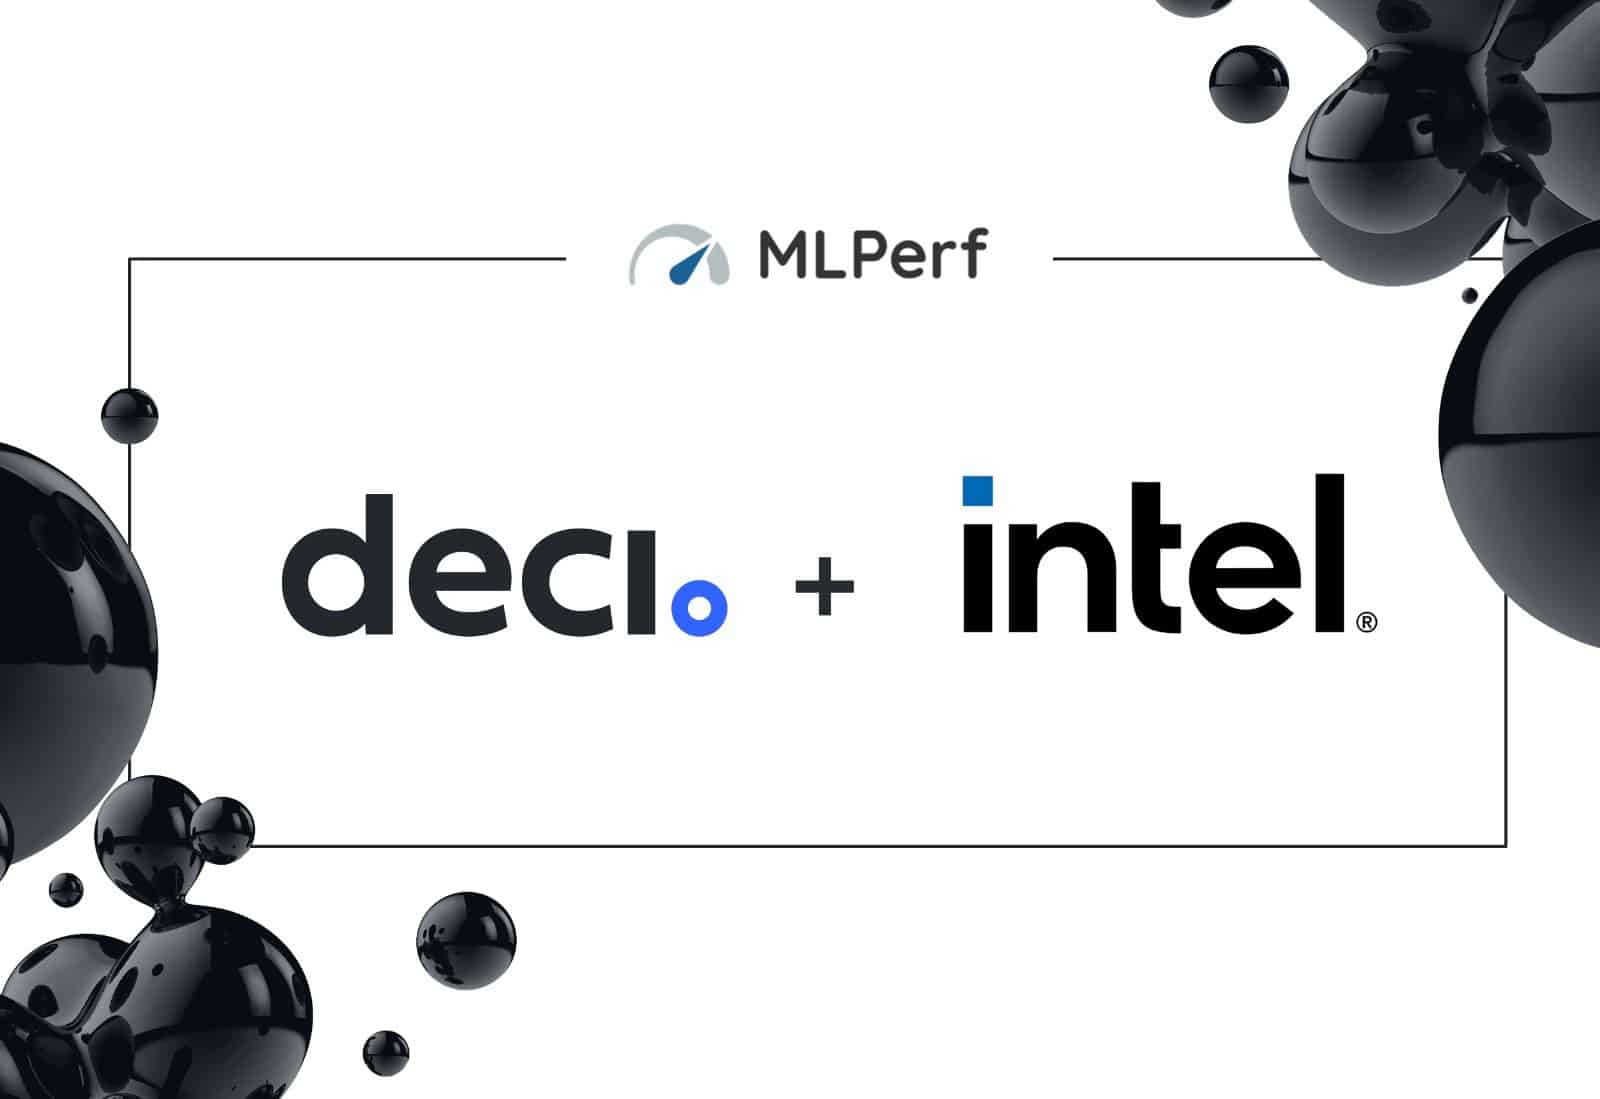 deci and intel MLPerf banner